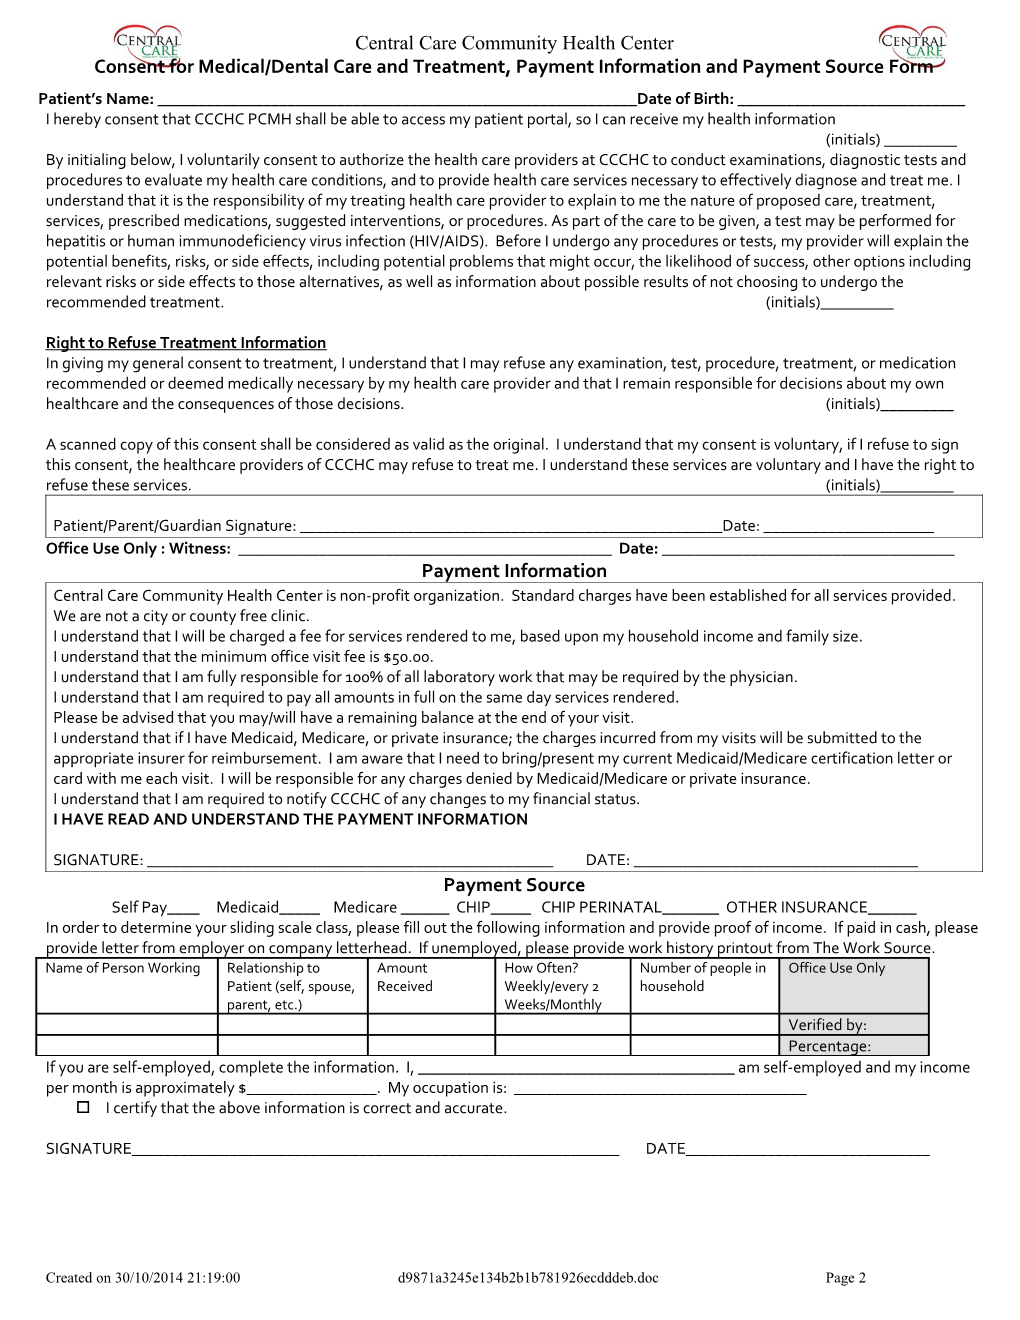 Consent for Medical/Dental Care and Treatment, Payment Information and Payment Source Form